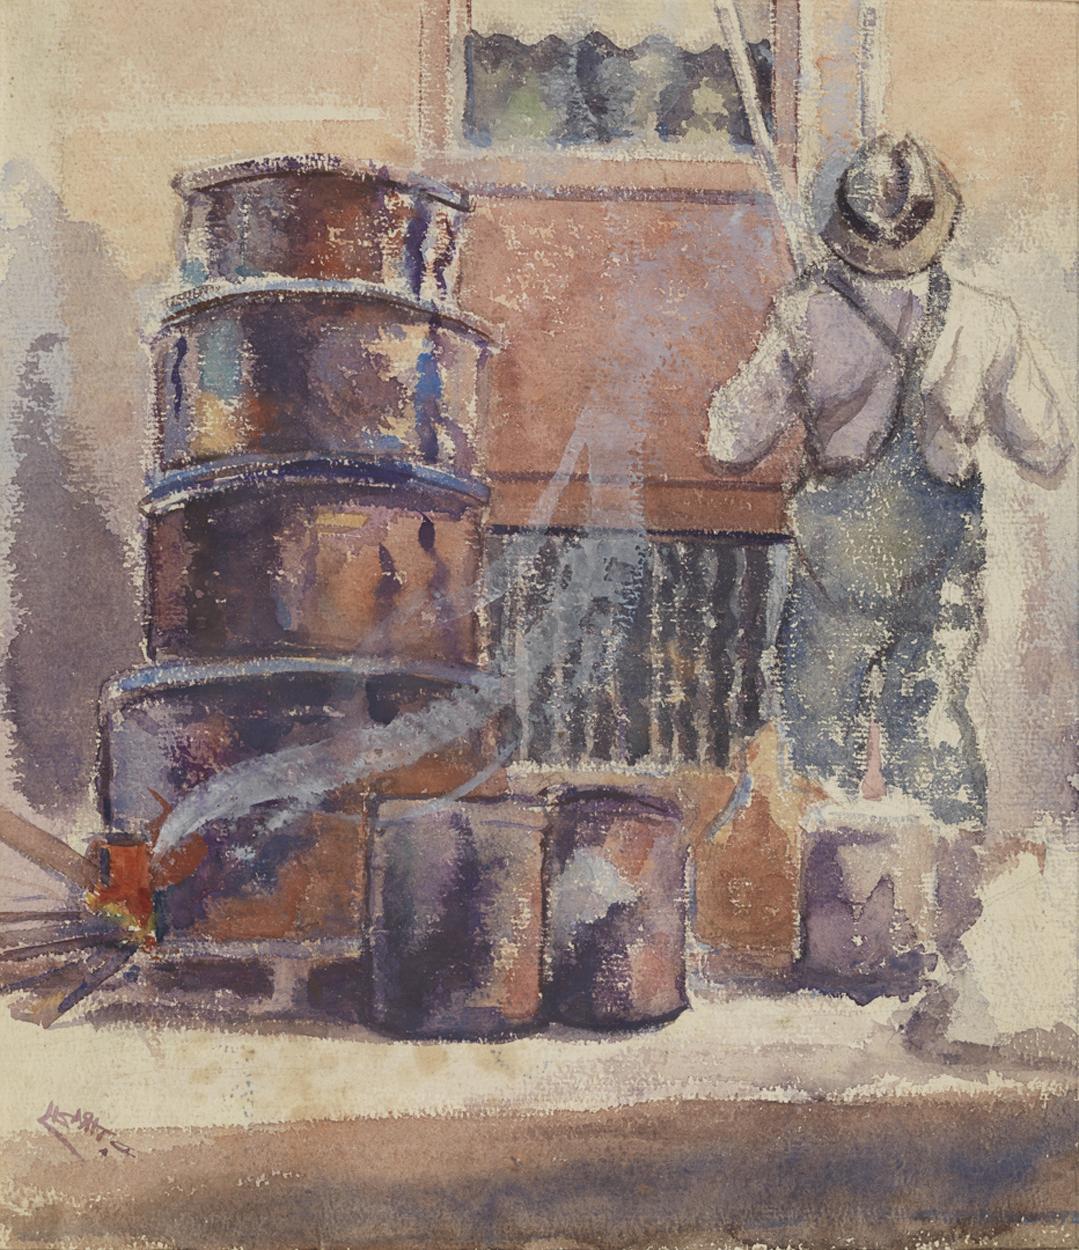 Untitled [Figure with oil barrels]